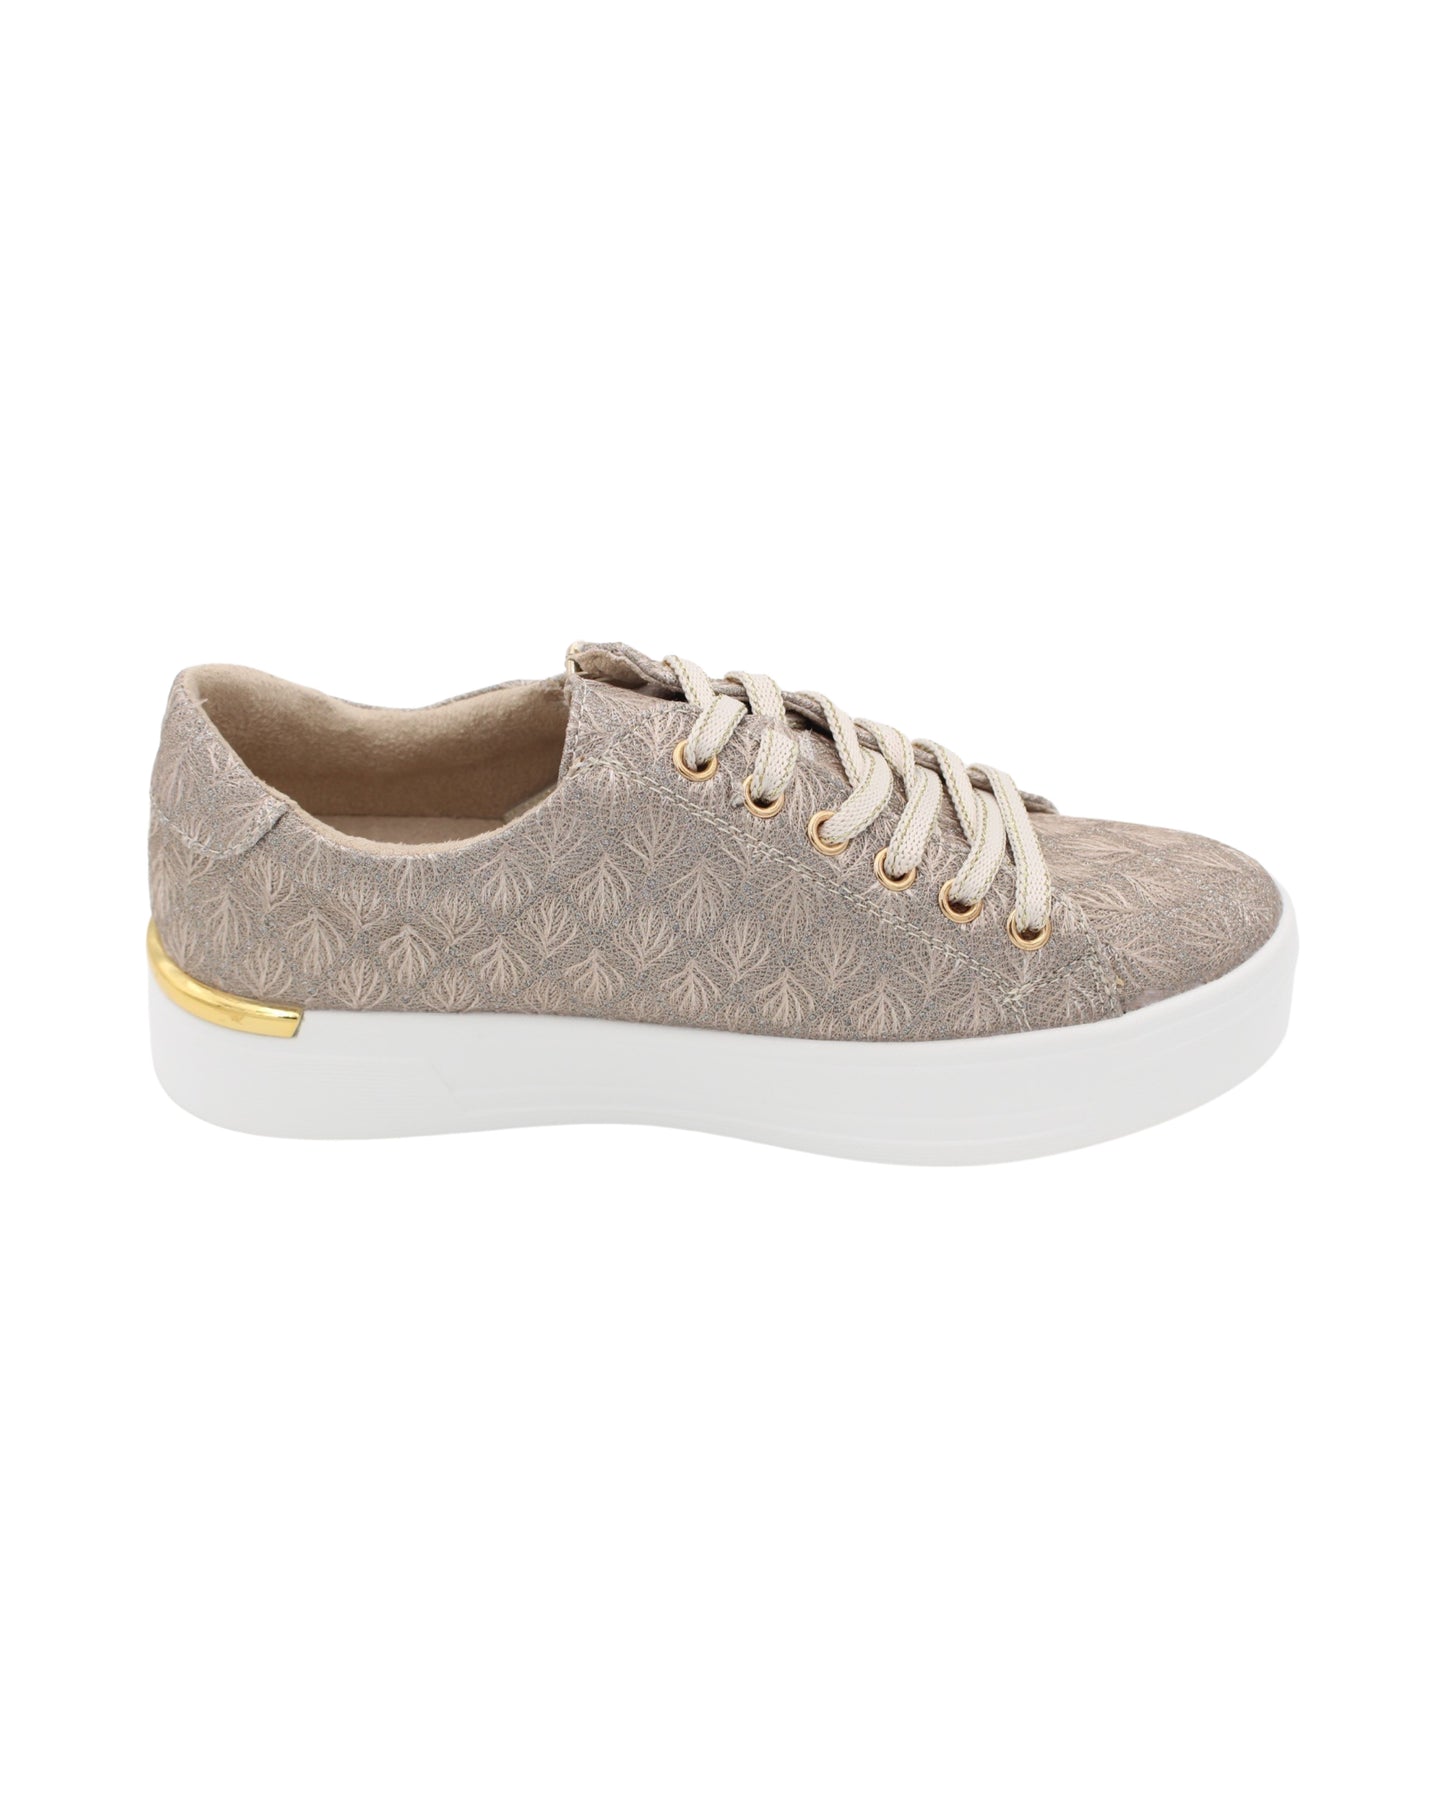 Lunar - Ladies Shoes Trainers Gold (2242)